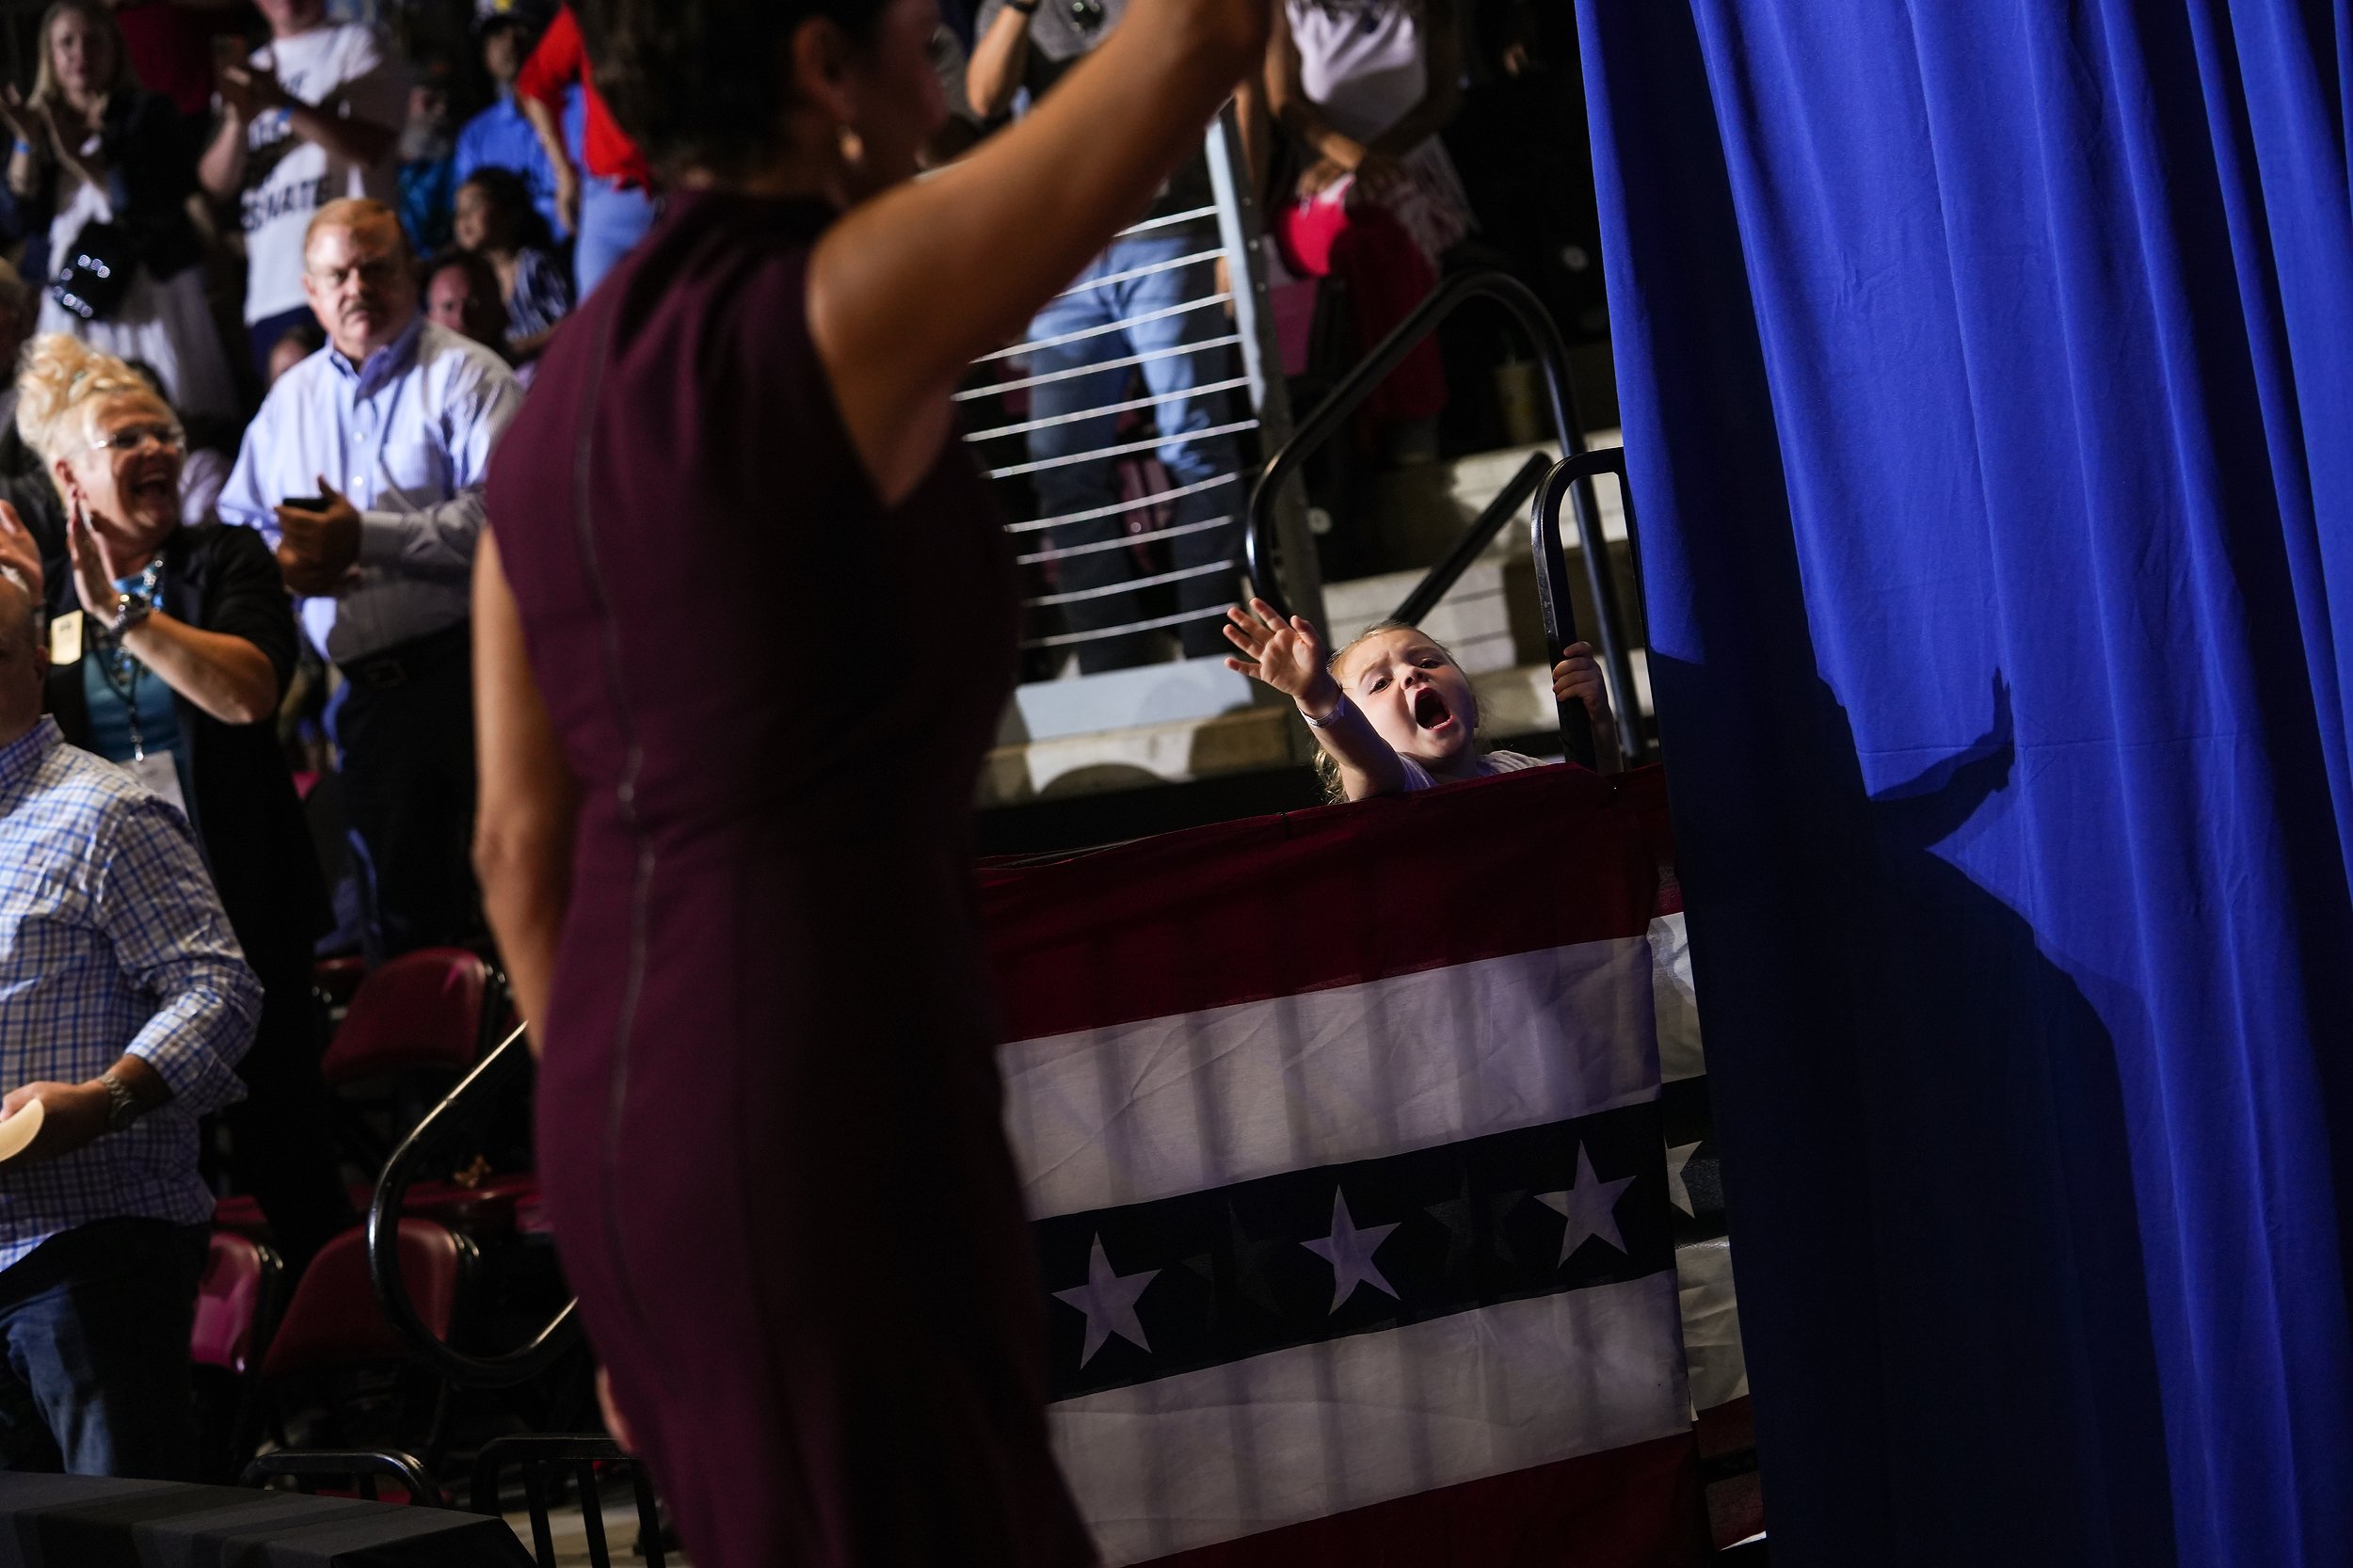  A child tries to get the attention of Kari Lake, Republican candidate for Arizona governor, as she walks off stage after delivering a speech during a Save America rally on Friday, July 22, 20222, in Prescott Valley. Former President Donald Trump hea